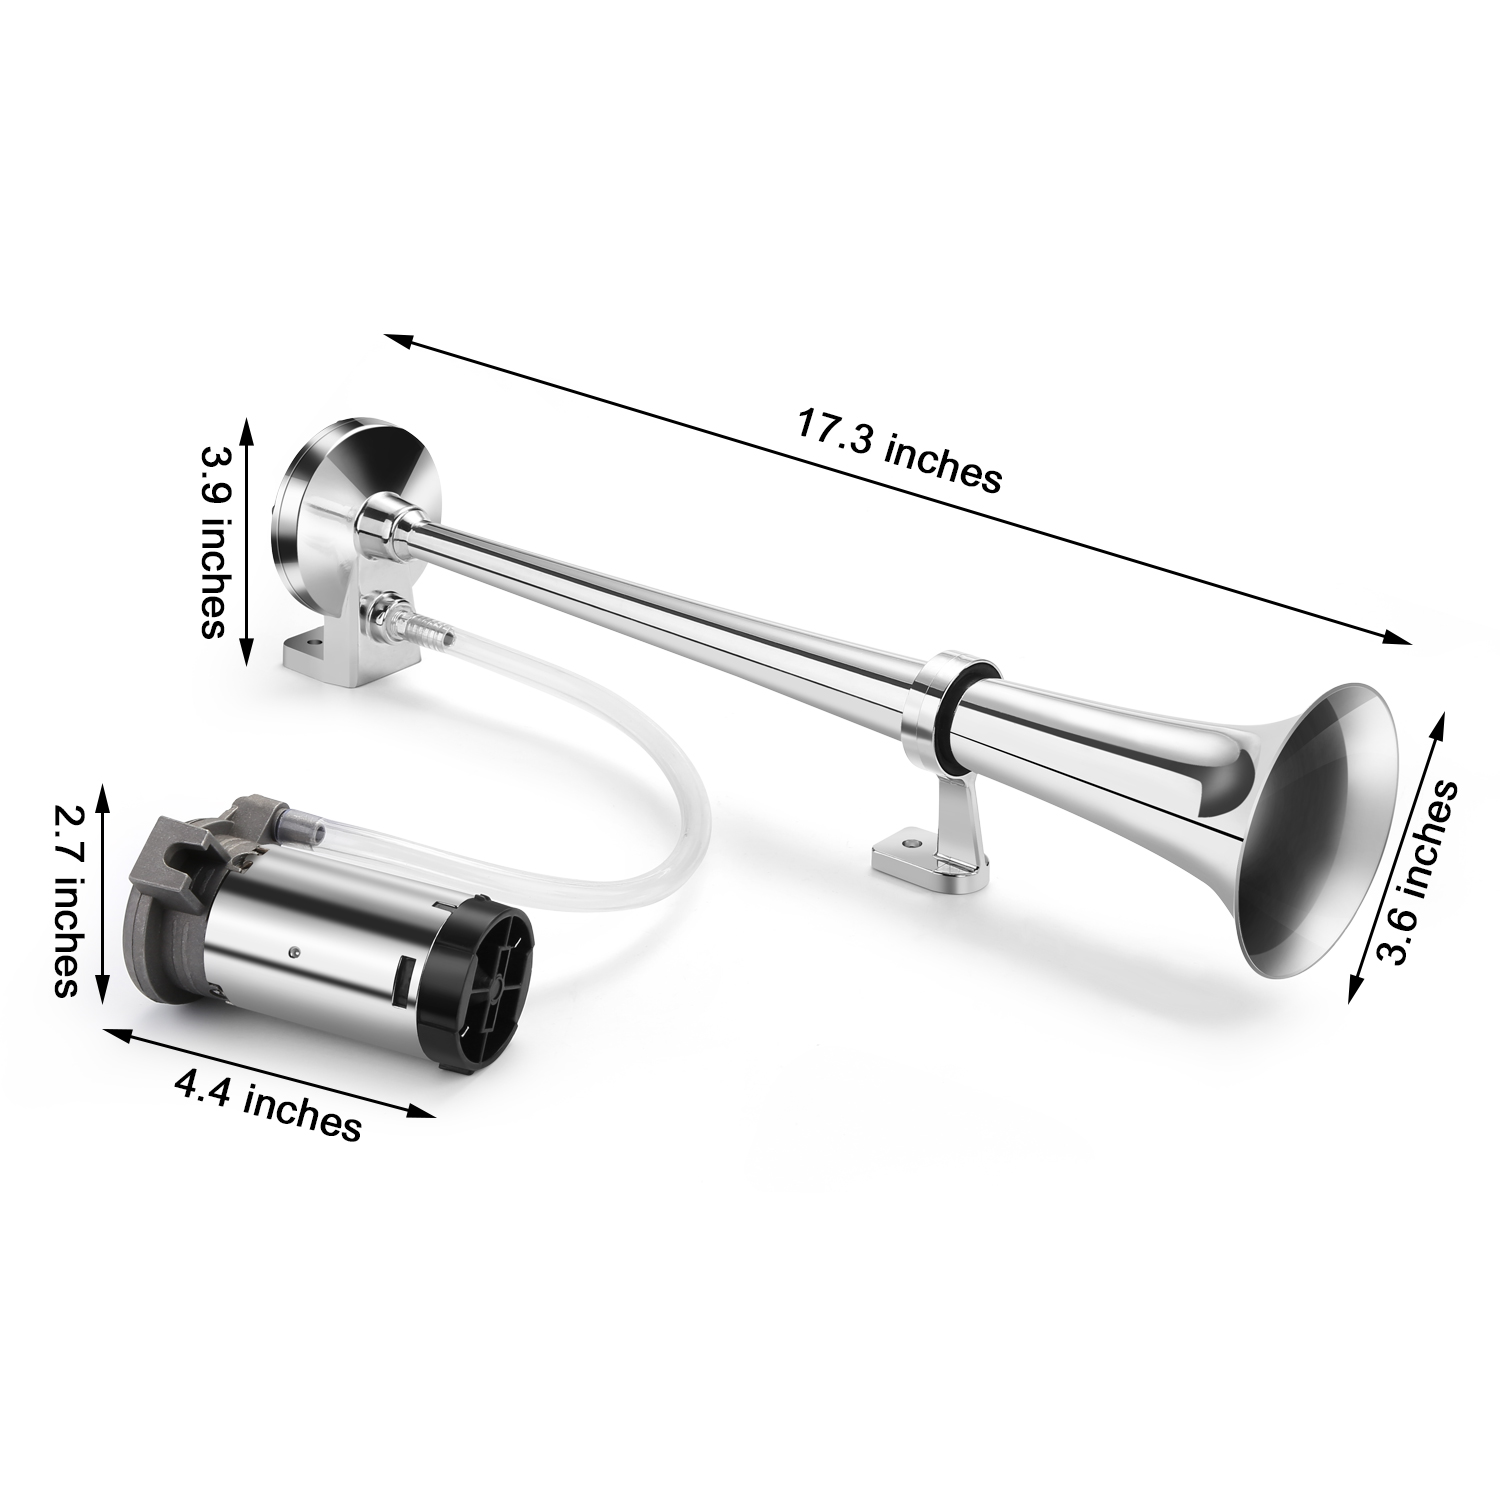 HK 12V 150db Air Horn, Dual Trumpet Chrome Zinc Air Horn with Compressor for Any 12V Vehicles Trucks Lorrys Trains Boats Cars Vans Kit (Silver)